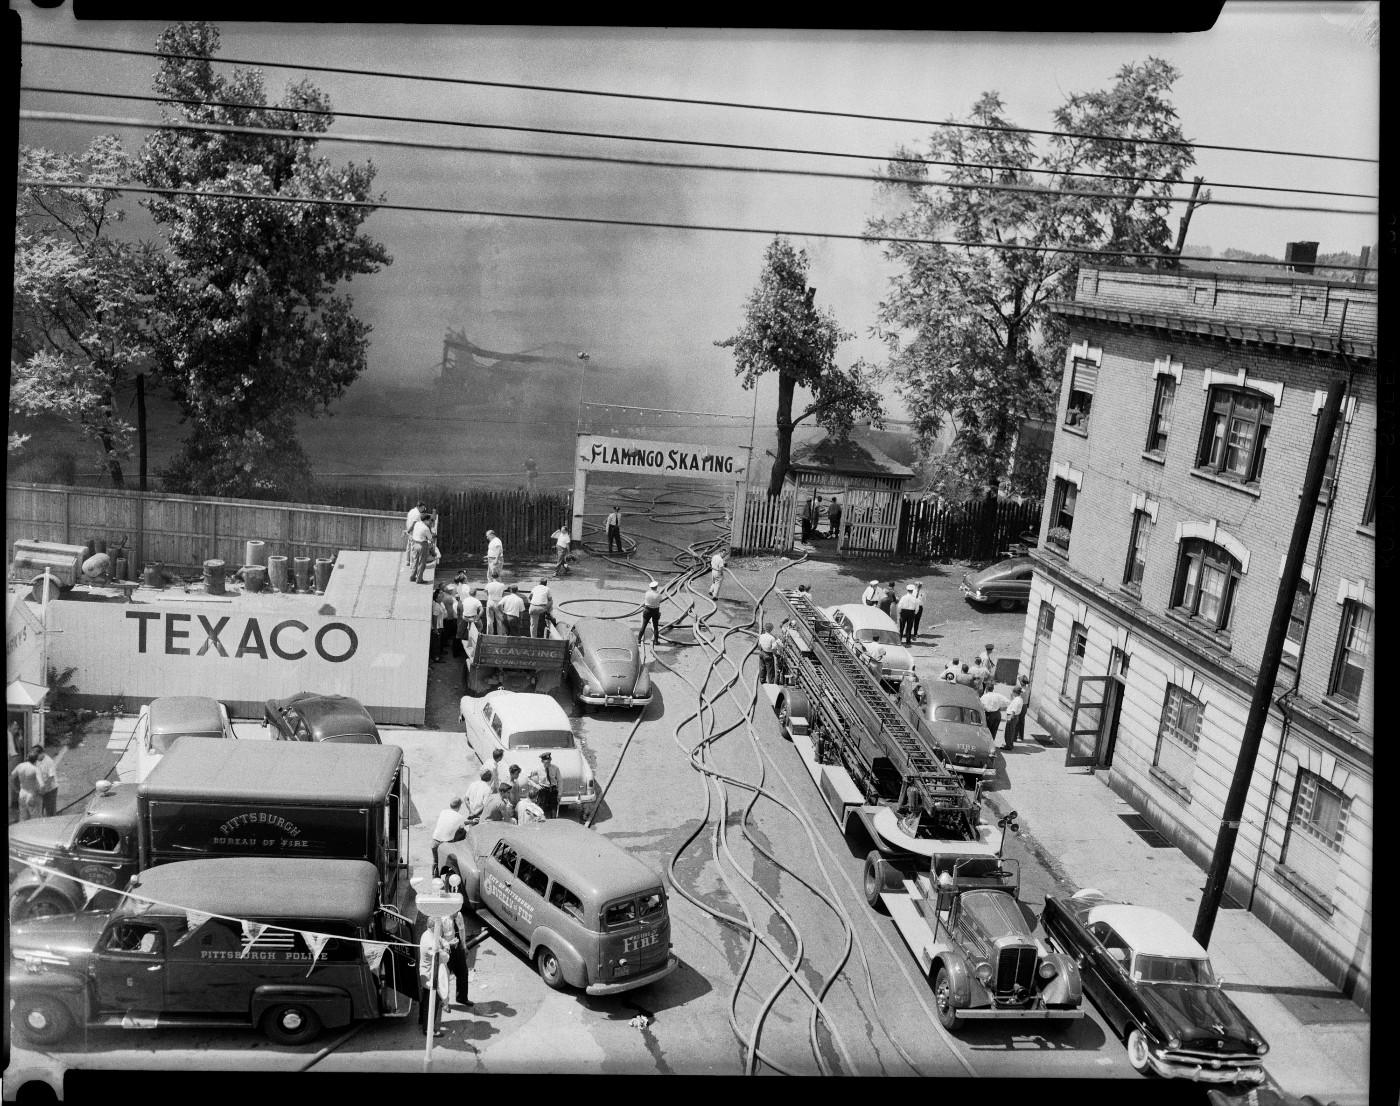 Charles “Teenie” Harris, ‘Fire fighters battling fire at Flamingo Skating rink, Larimer and Auburn Avenues, East Liberty,’ July 1954